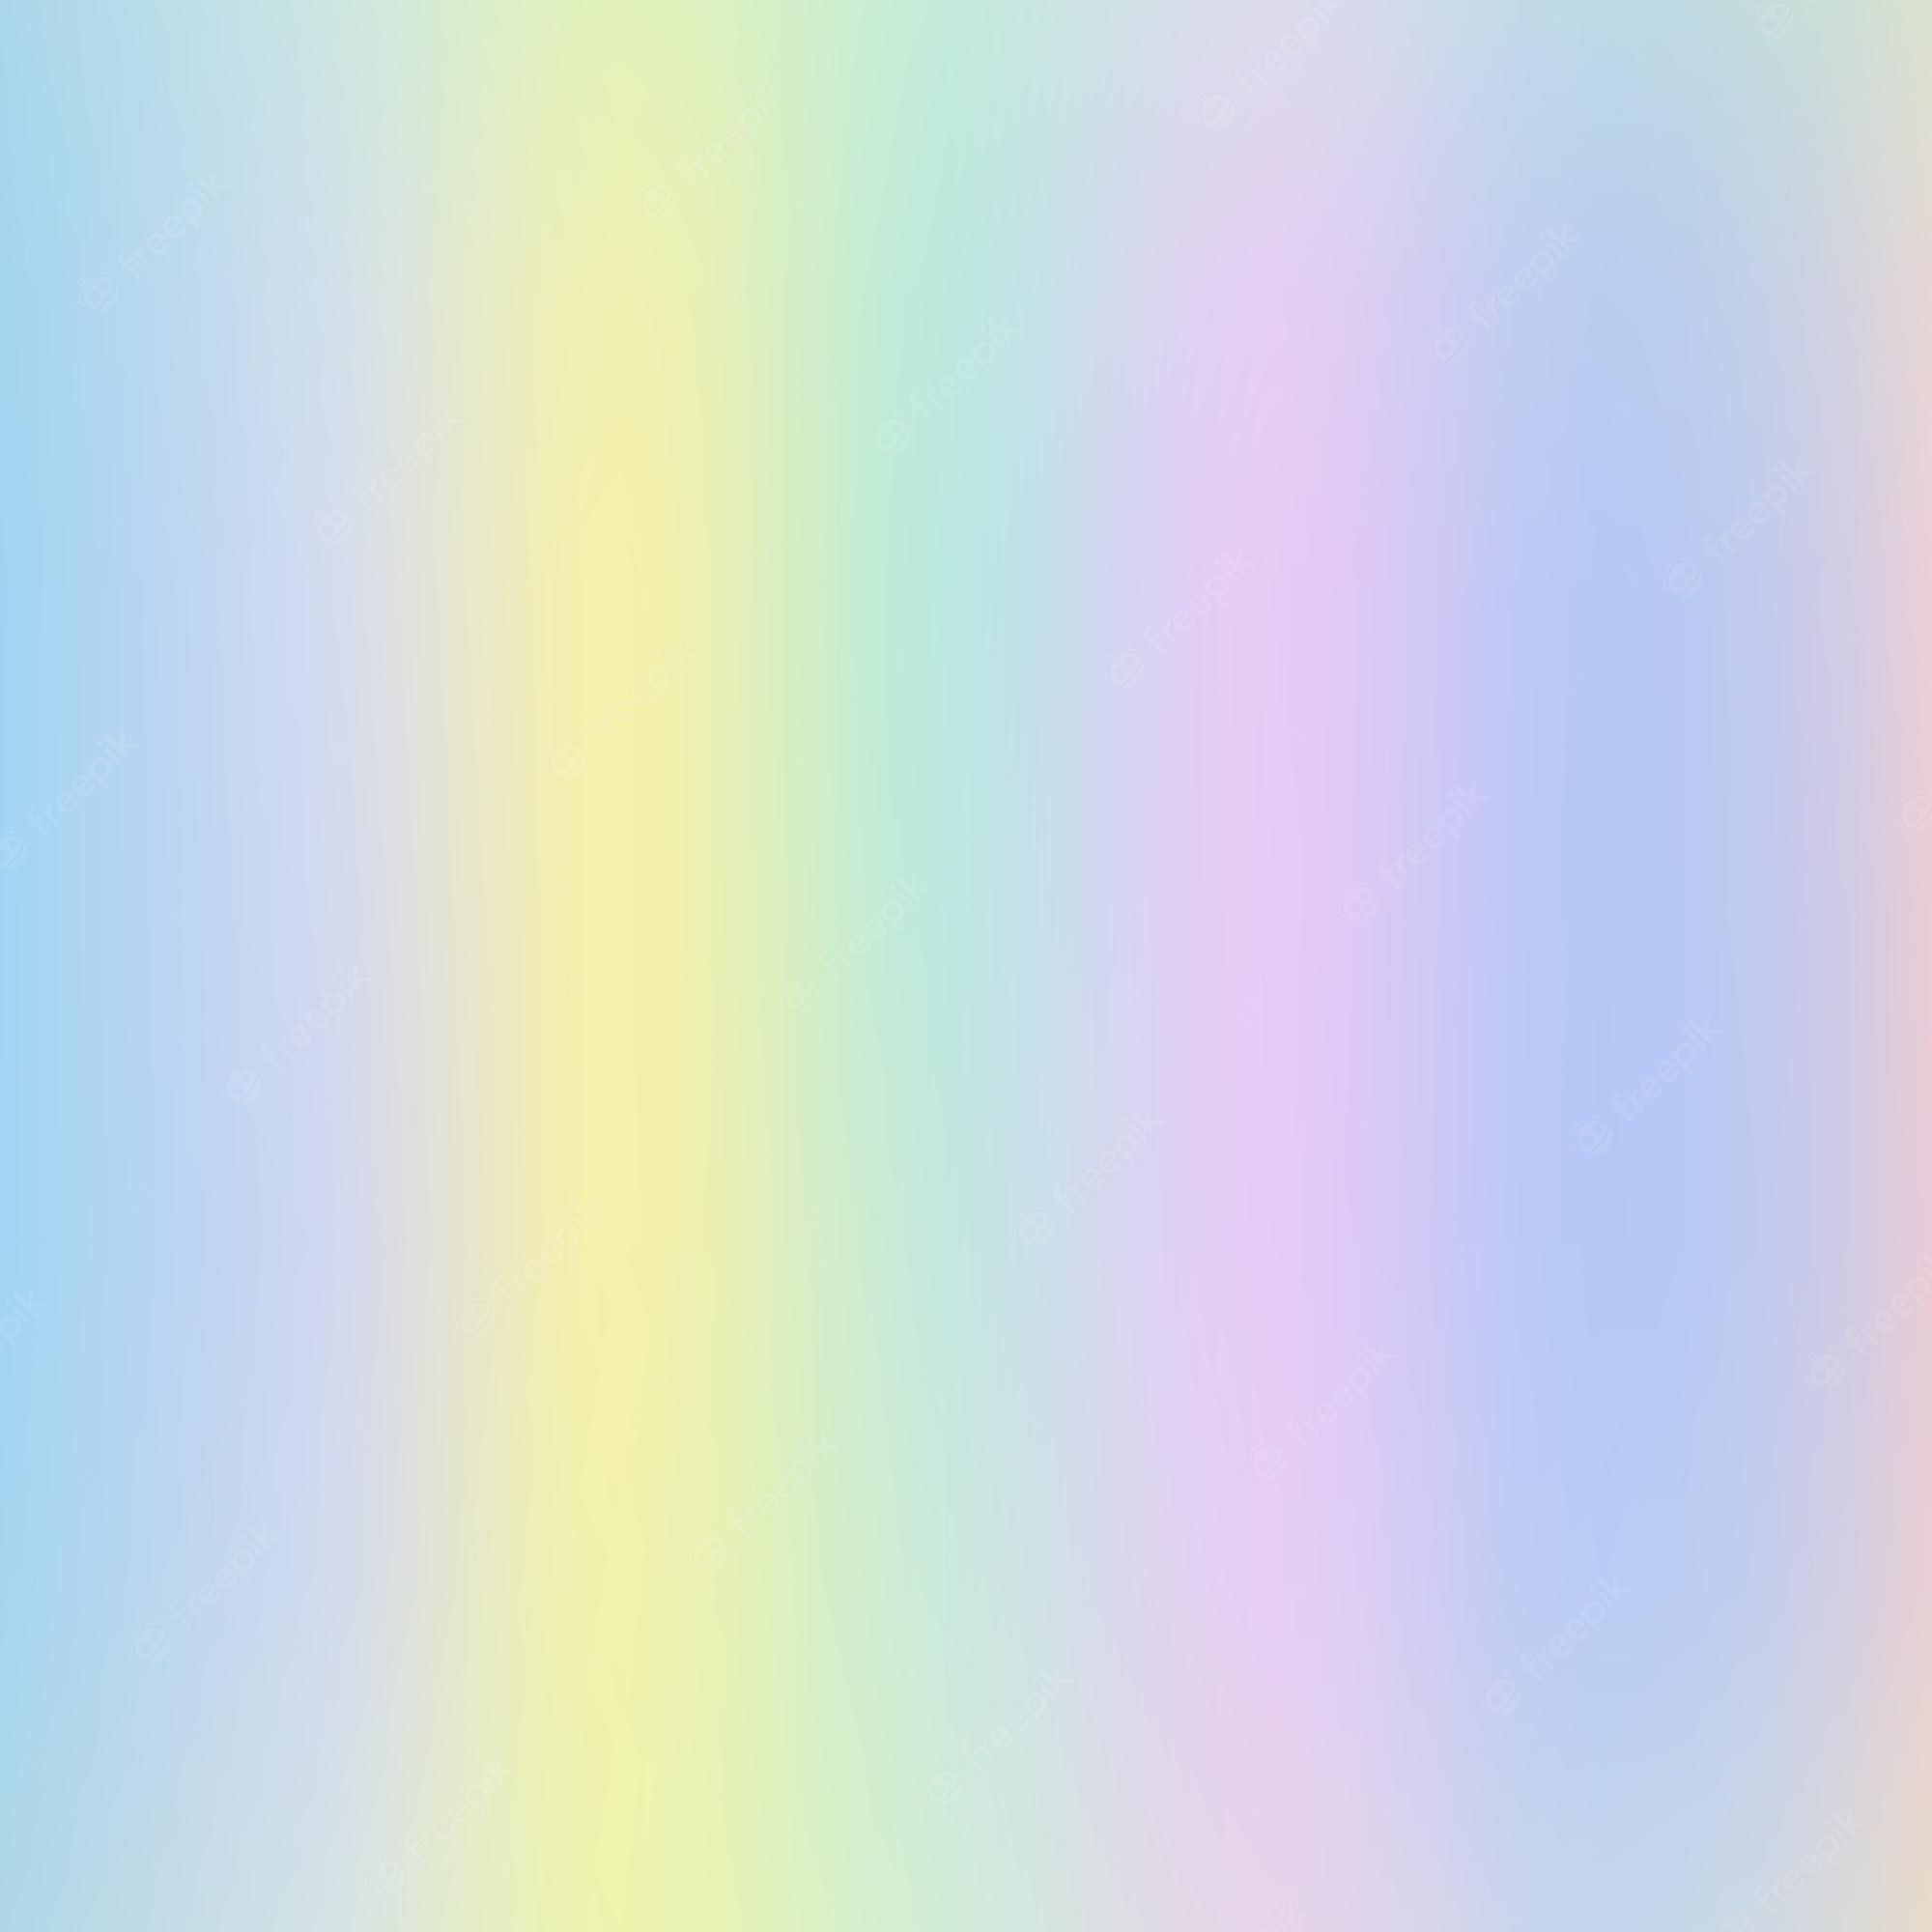 A rainbow colored background with some lines - Pastel rainbow